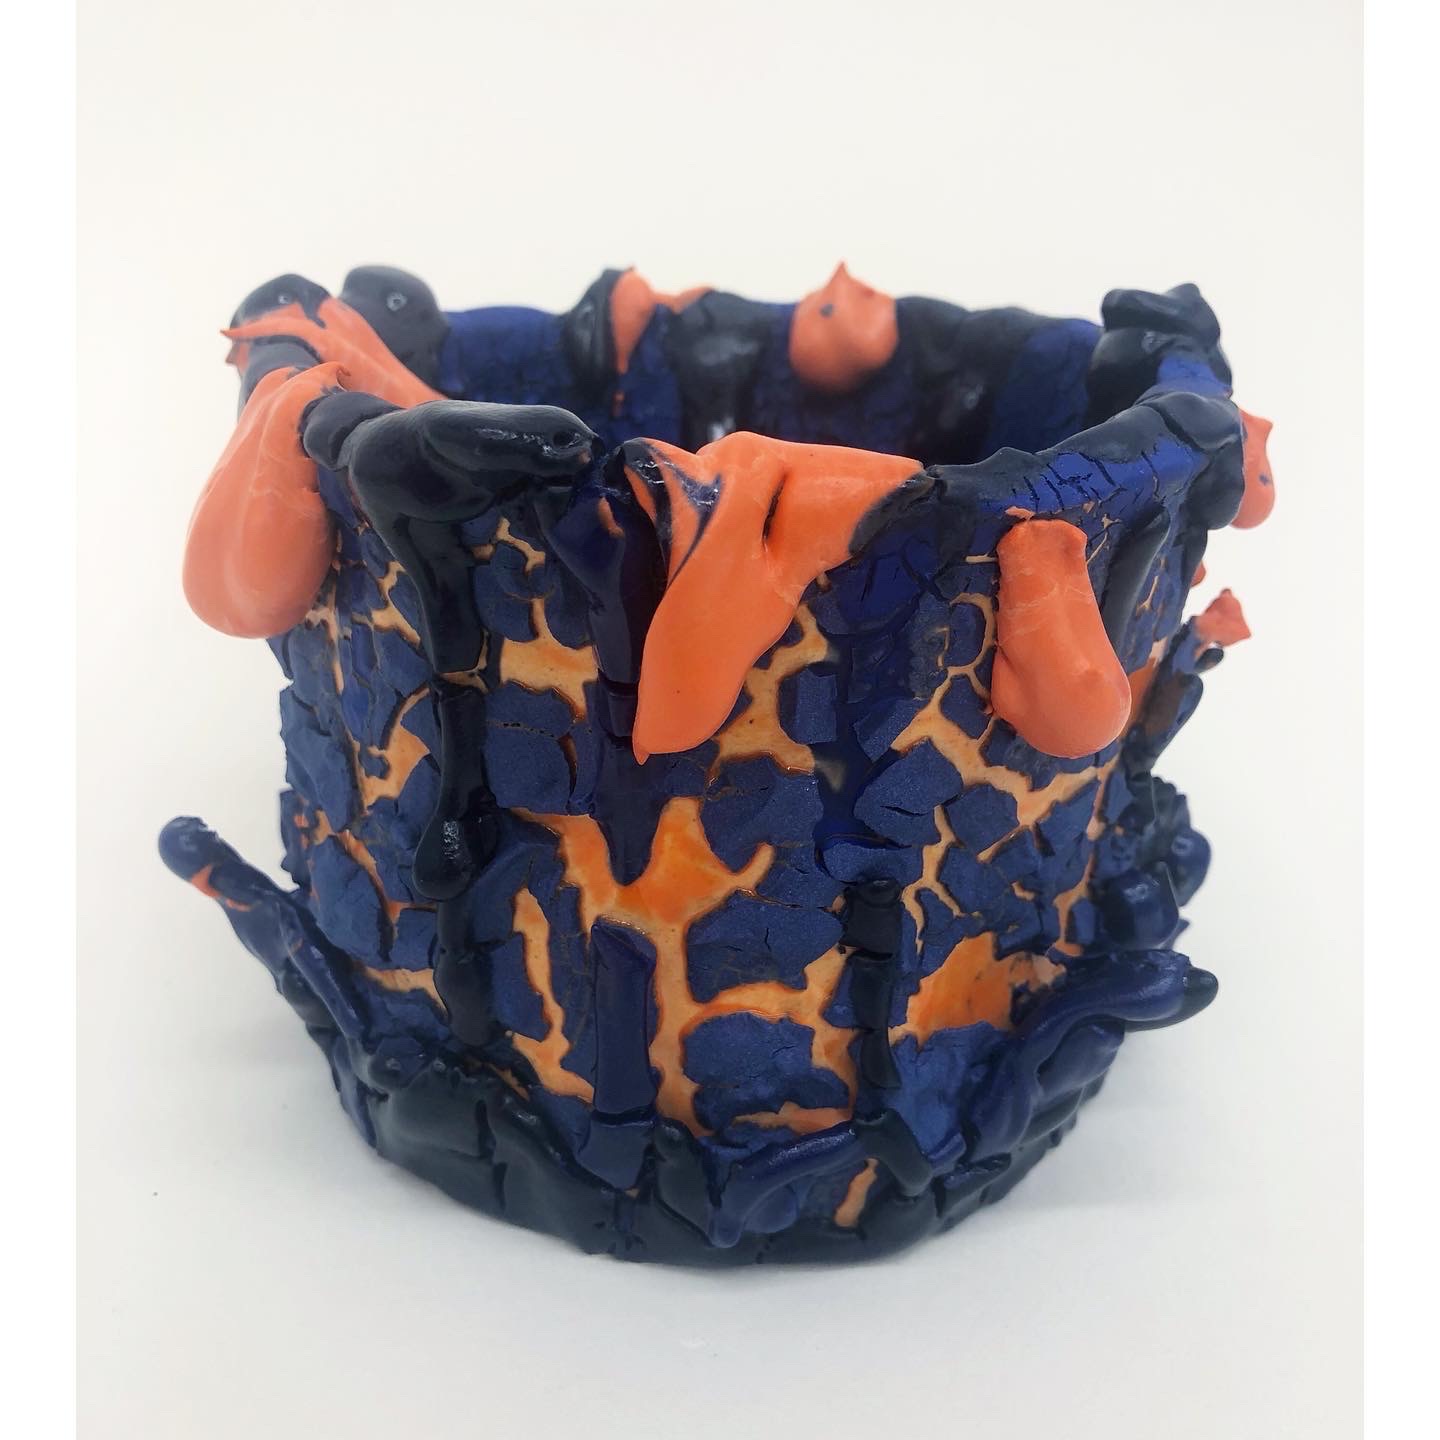 Photo of a blue and orange cup shaped sculpture